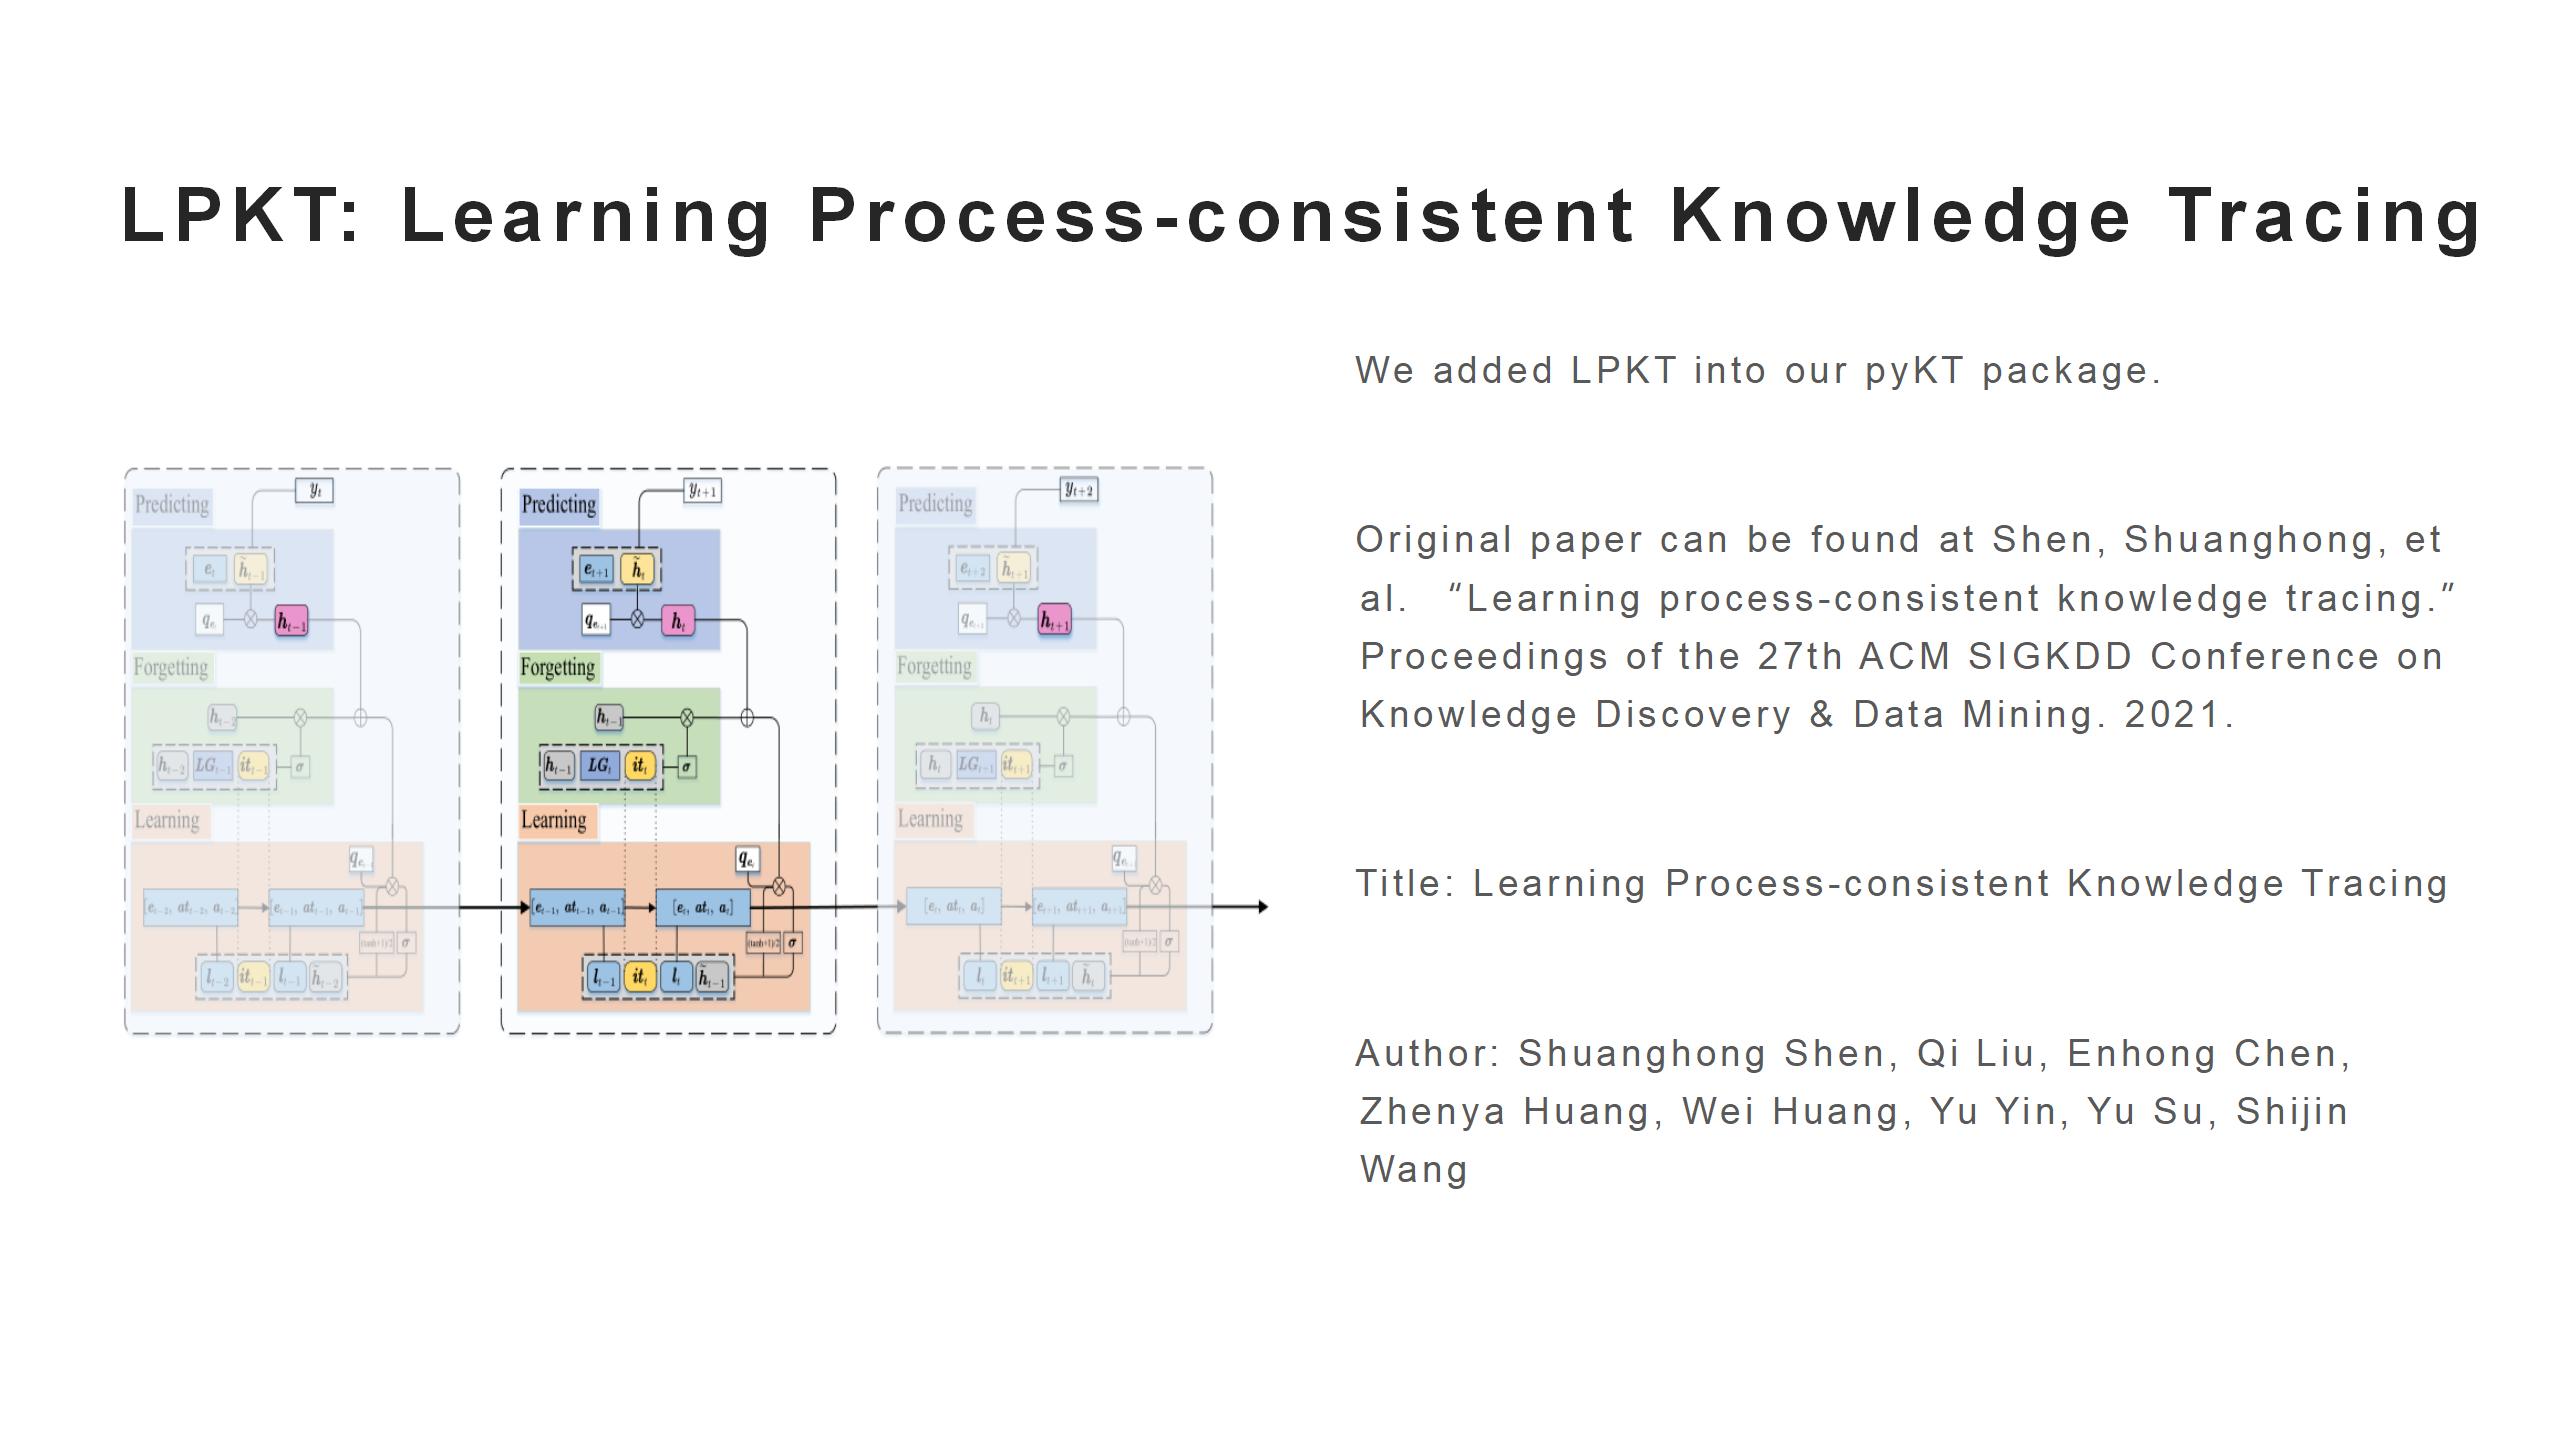 LPKT: Learning Process-consistent Knowledge Tracing